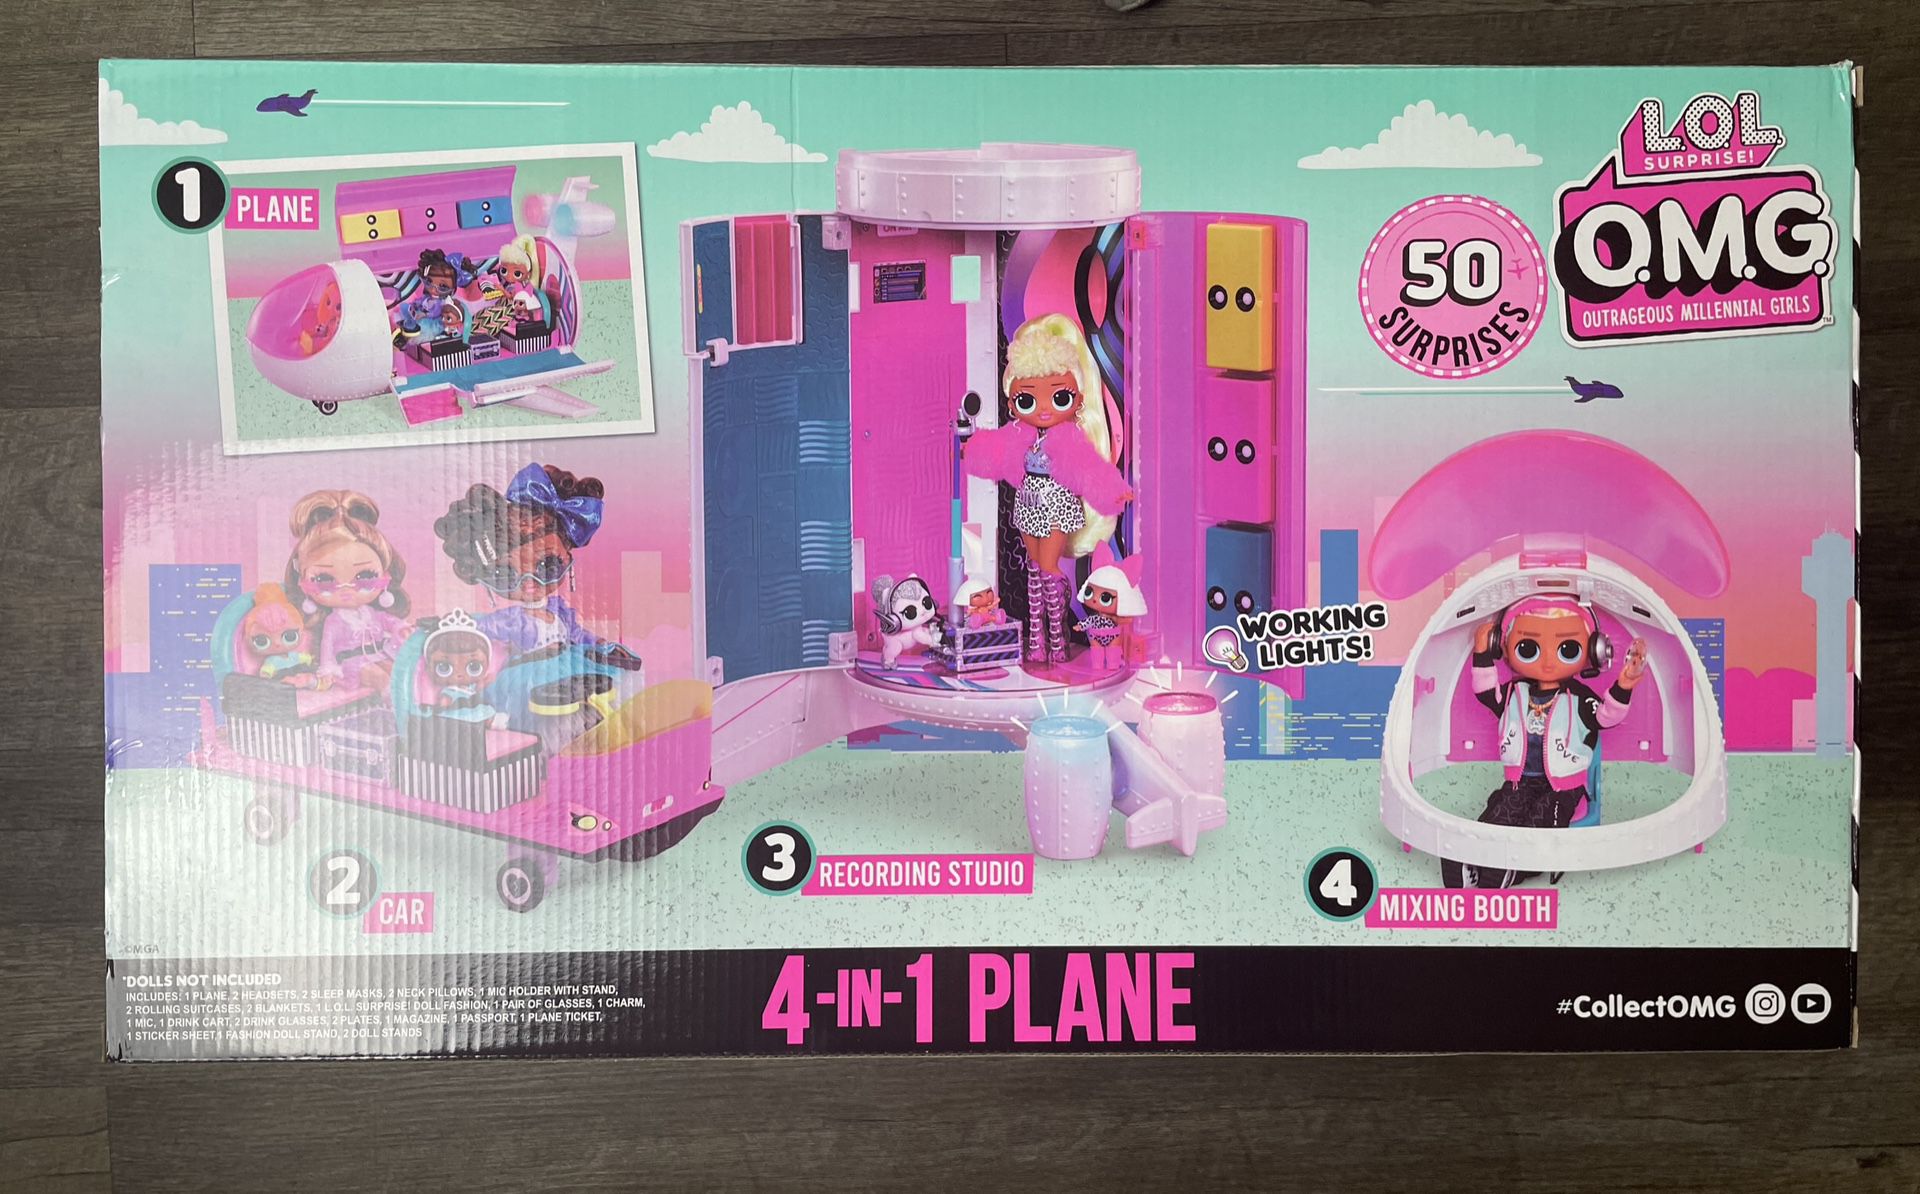 LOL Surprise OMG Plane 4-in-1 Play set with 50 Surprises 